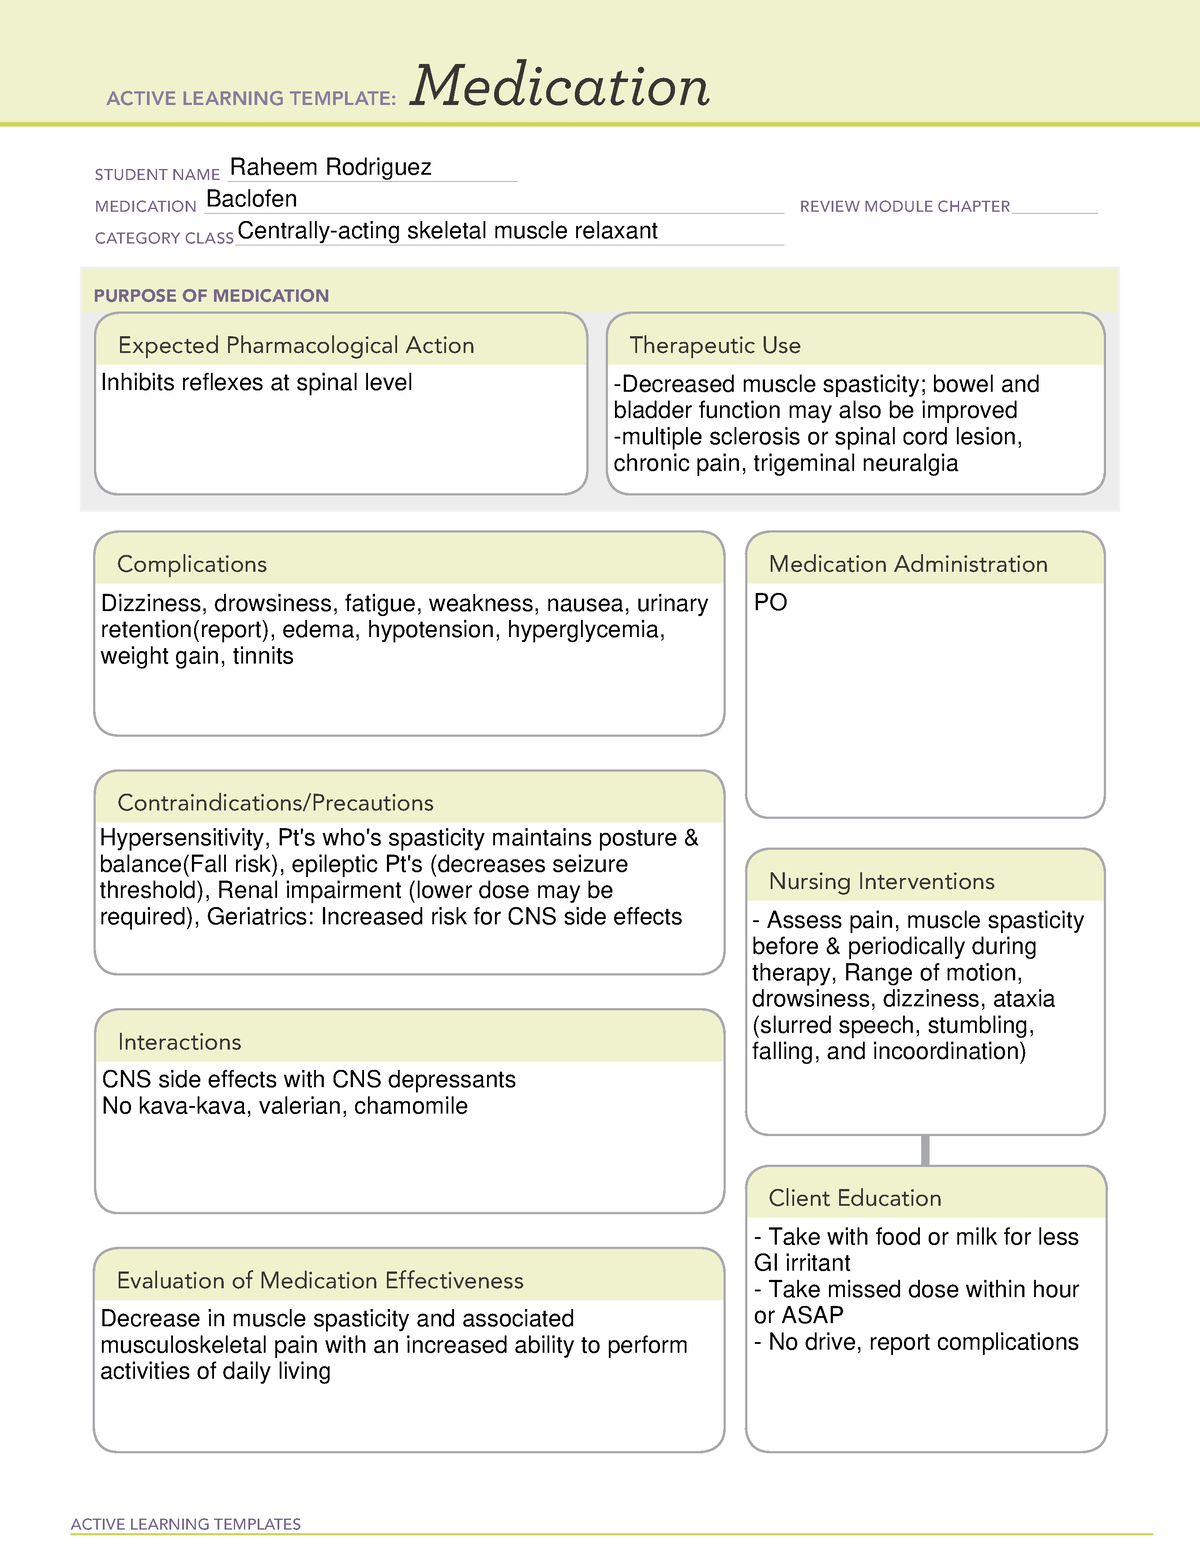 ATI medication template Baclofen ACTIVE LEARNING TEMPLATES